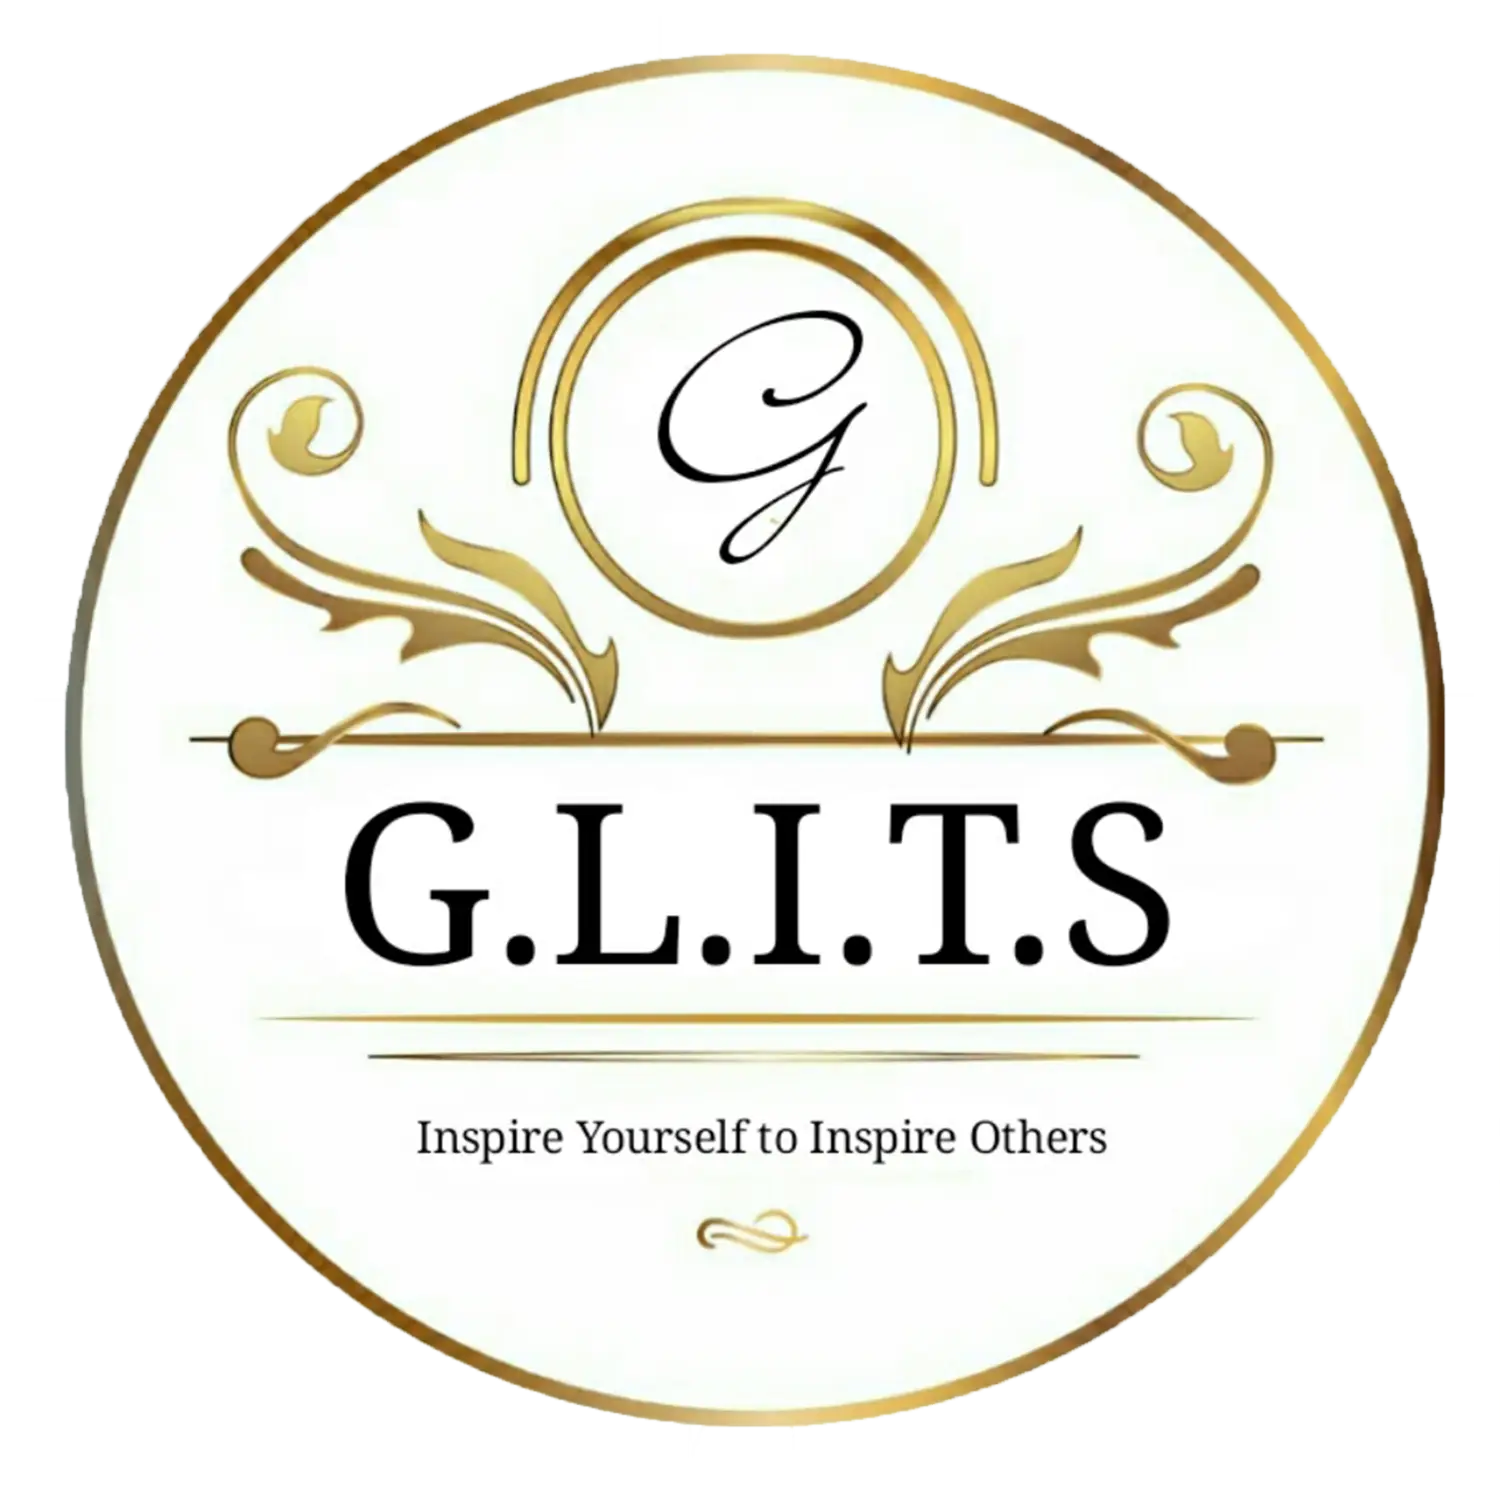 HAPPY PRIDE! Support G.L.I.T.S by Shopping at Friends on Pride Day